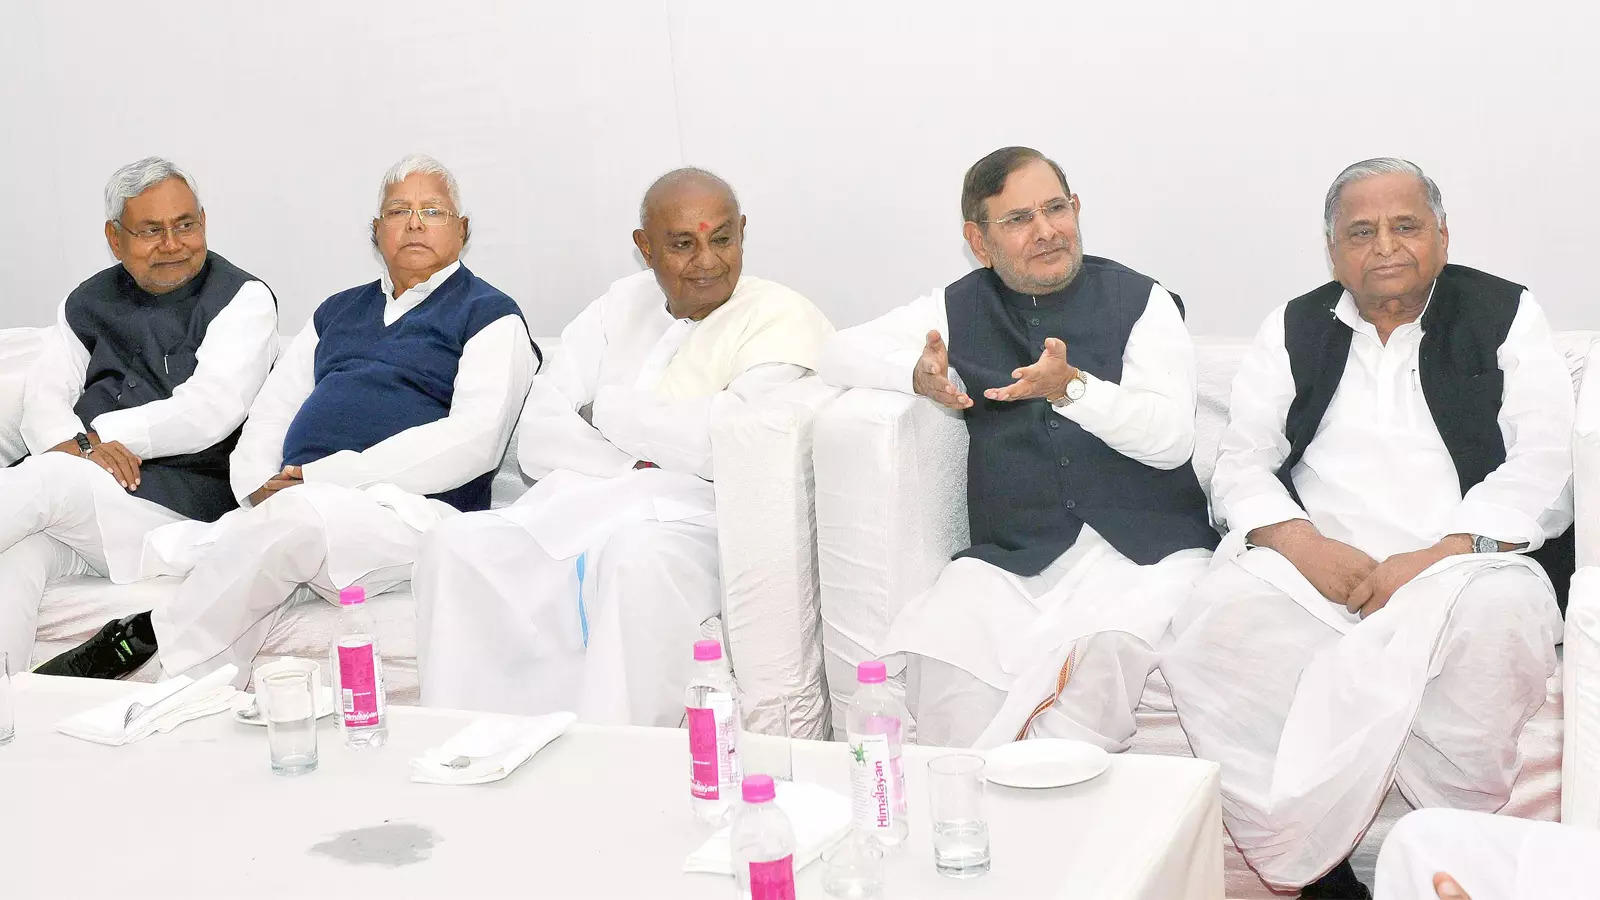 Friends' friend, Mulayam was let down by family | India News - Times of India